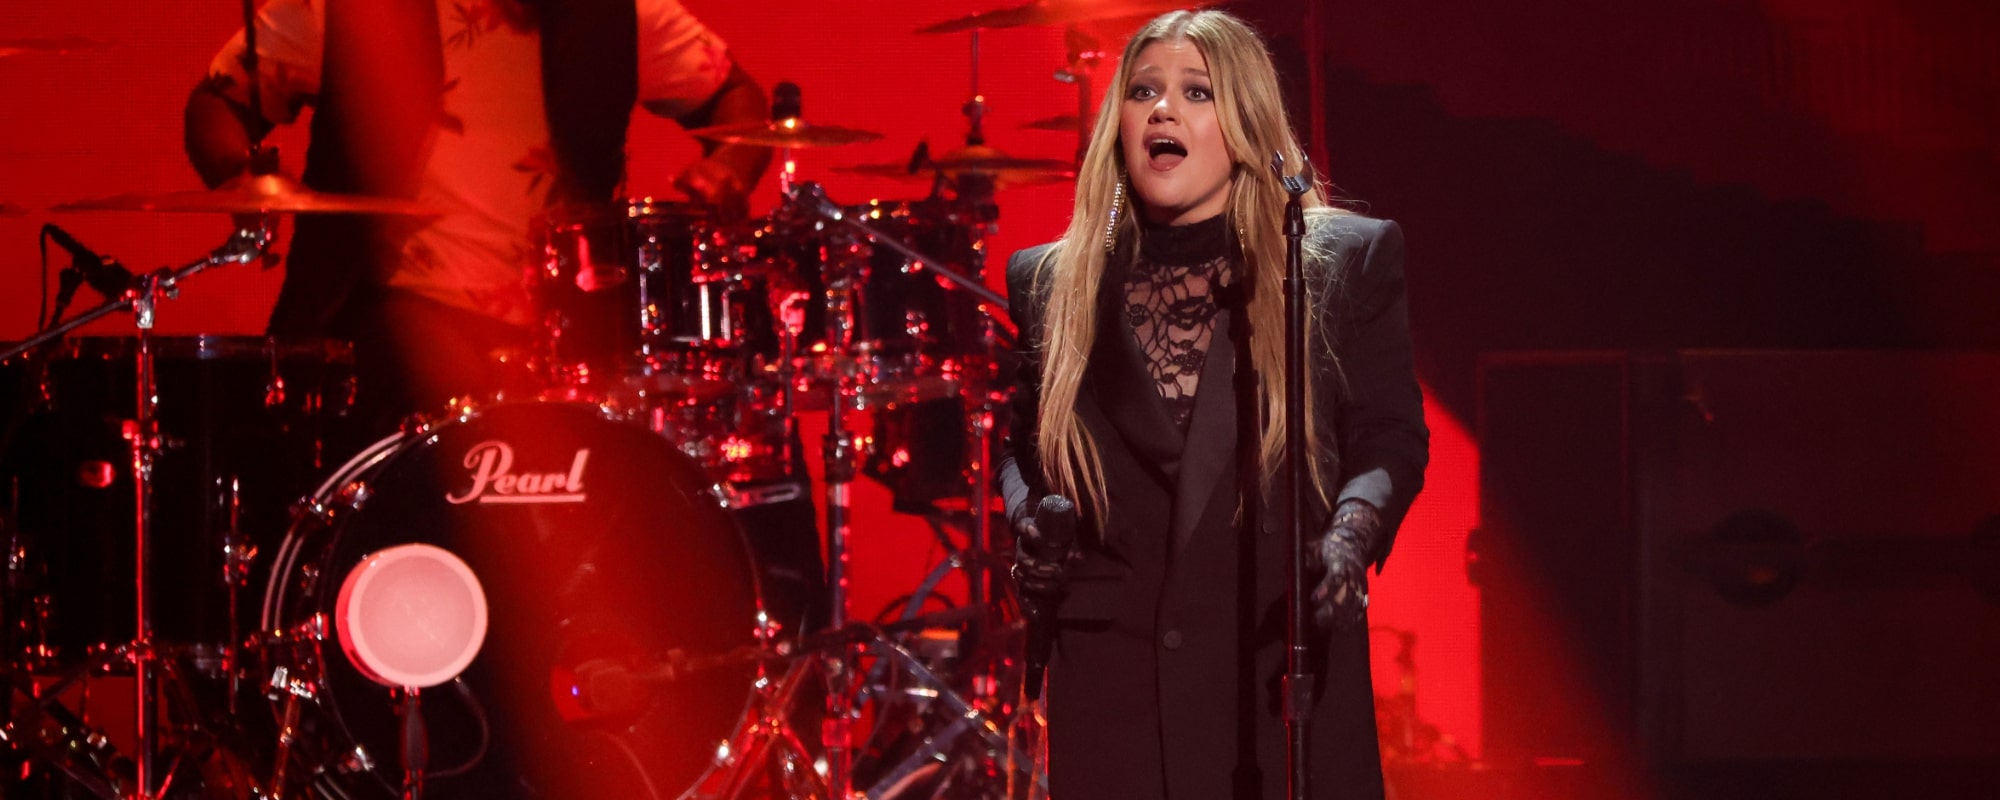 Watch: Kelly Clarkson Delivers Early Christmas Gift with Kellyoke Version of “Underneath the Tree”